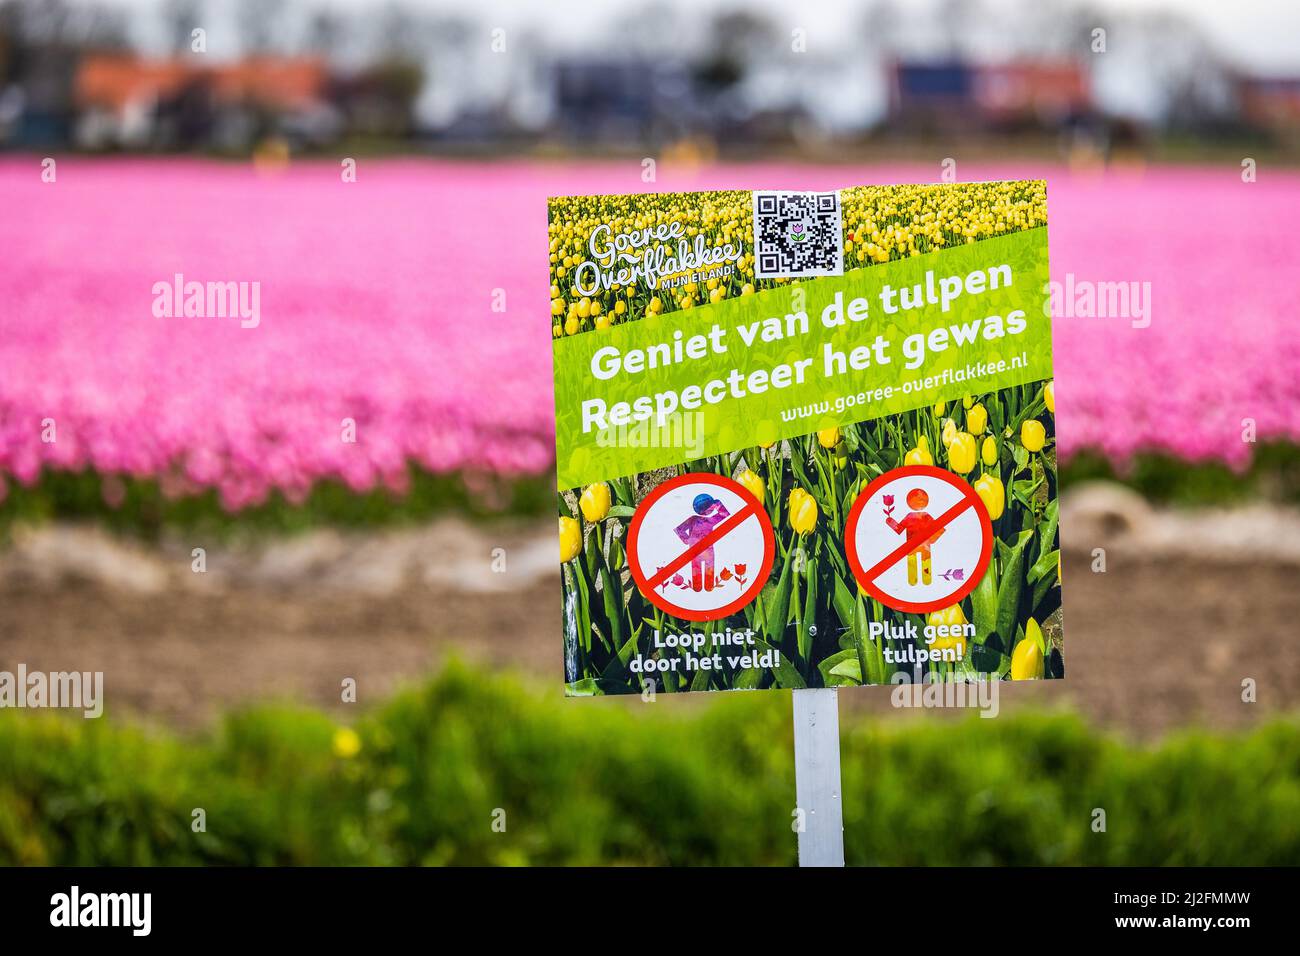 2022-03-31 08:06:40 31-03-2022, Zuid-Beijerland - Tulip fields in bloom on a field in Zuid-Beijerland. The tulips bloom early this year due to the beautiful sunny weather. Photo: ANP / Hollandse Hoogte / Jeffrey Groeneweg netherlands out - belgium out Stock Photo